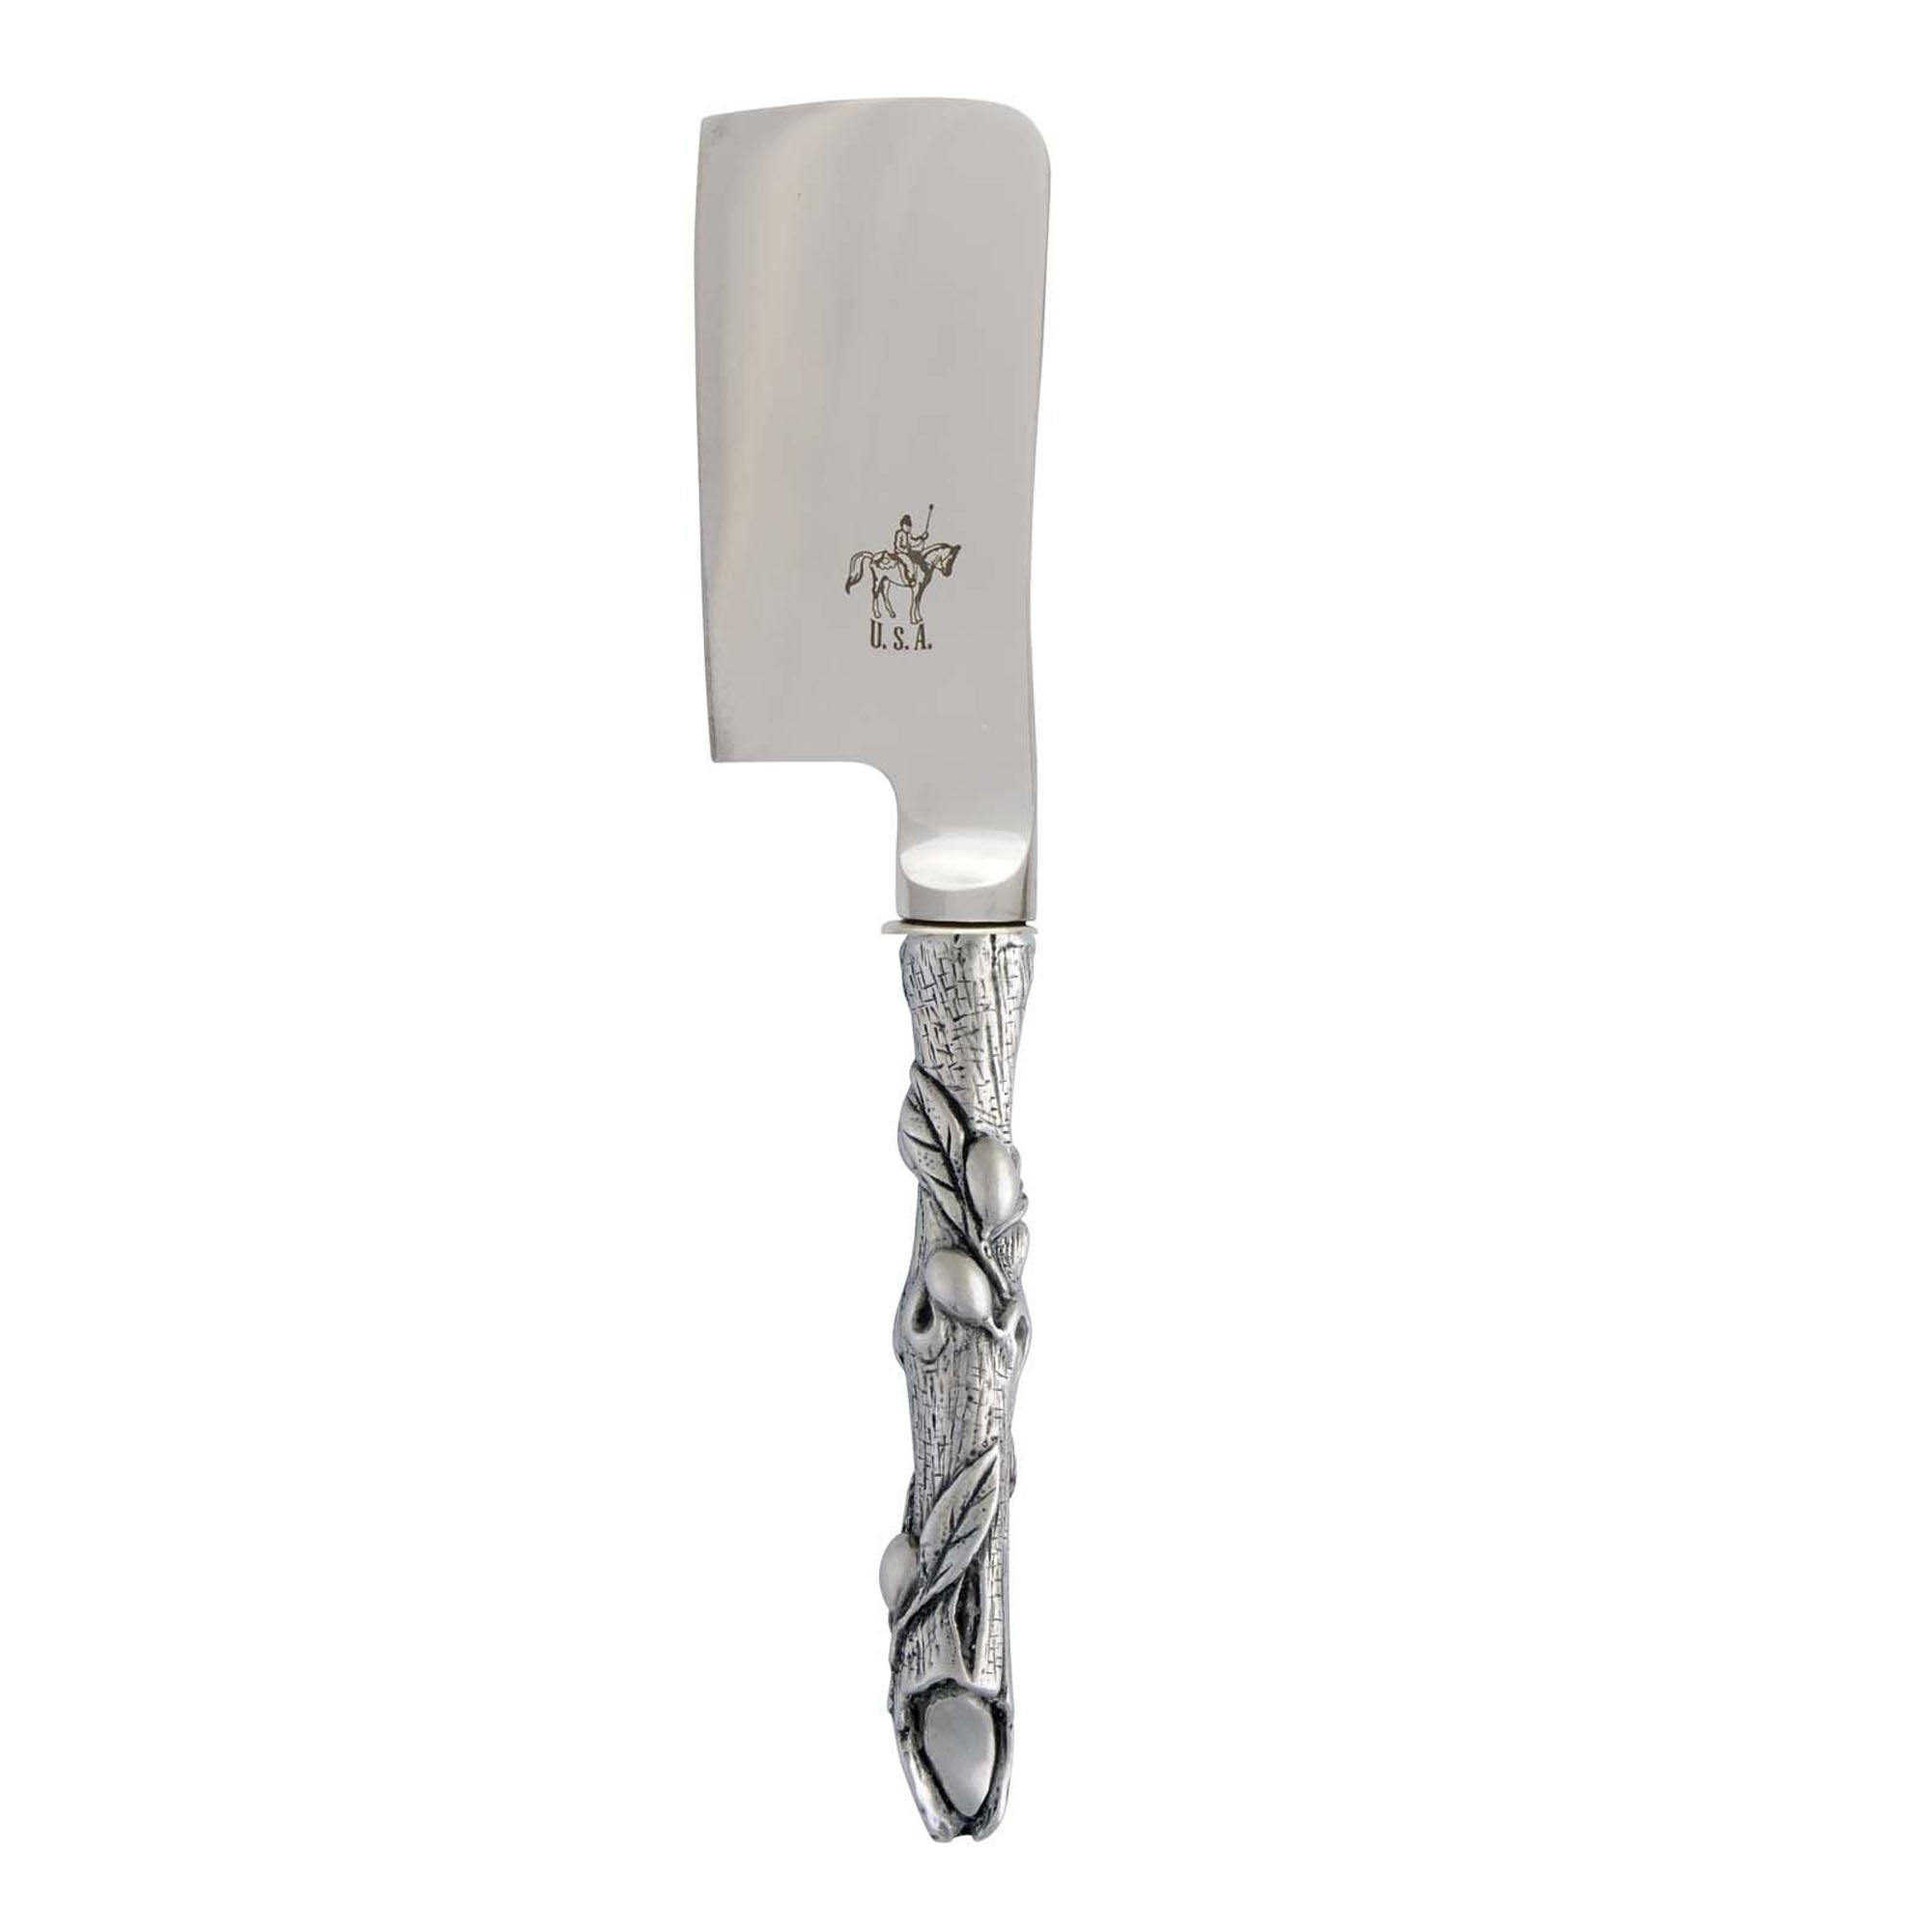 Vagabond House Pewter Olive Cheese Cleaver Product Image